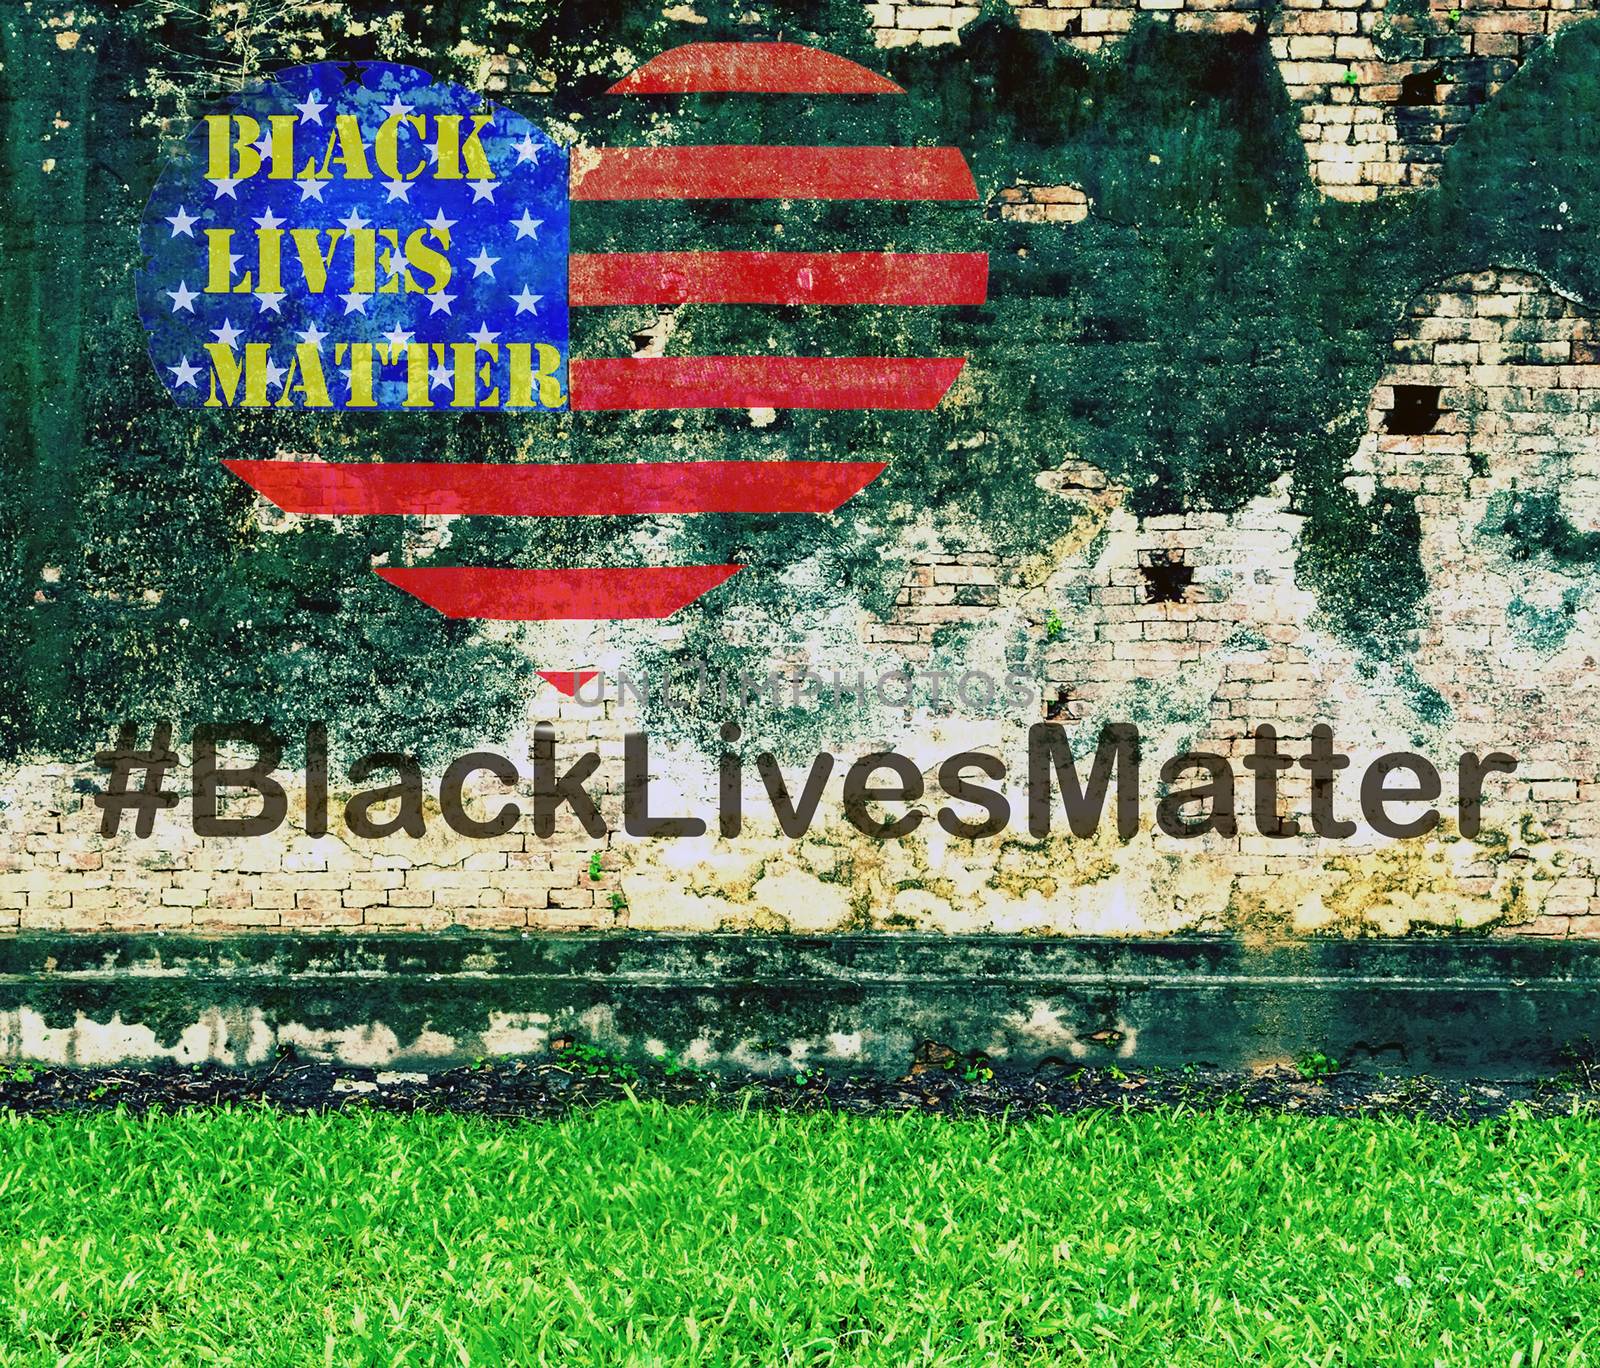 Black Lives Matter slogan hashtag liberation banner protestors heart stencil on American flag USA city street Green grass and old brick wall background urban cracked building